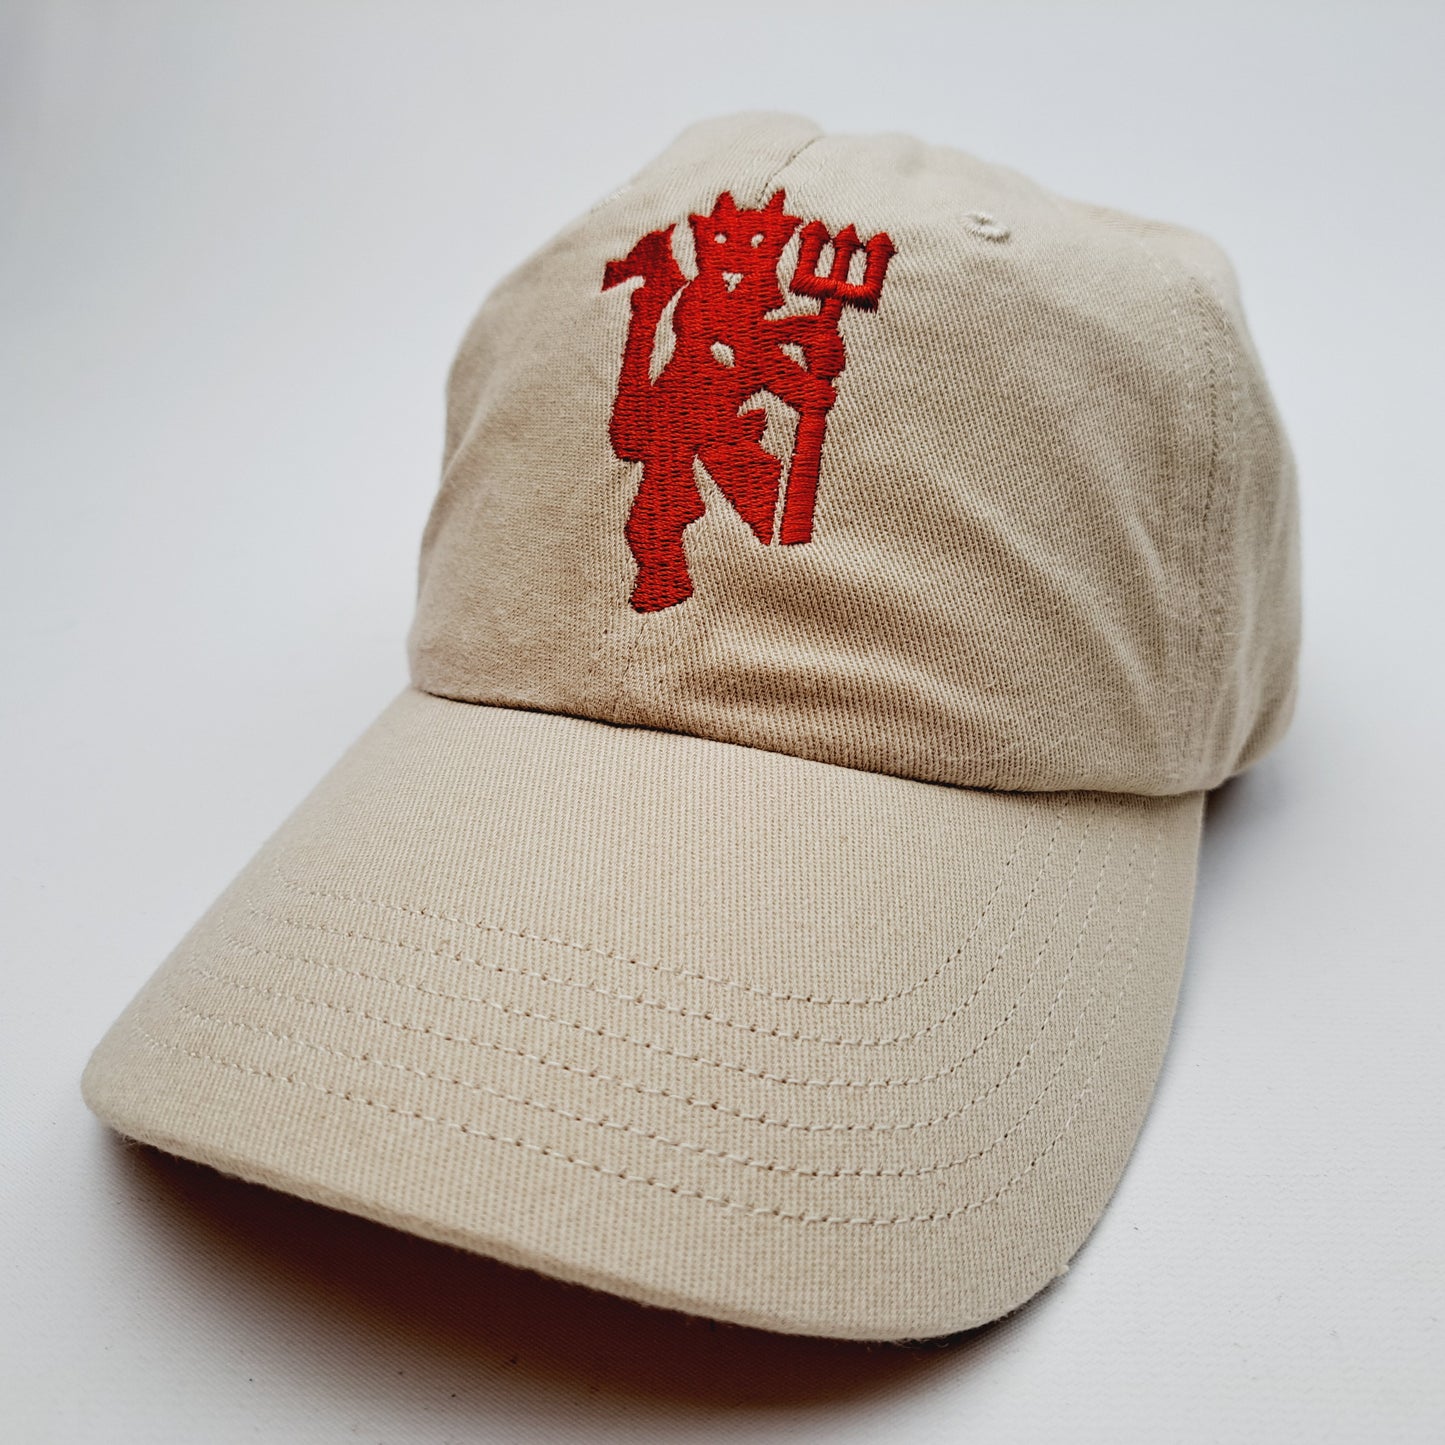 Manchester United Football Soccer Club Relaxed Cotton Cap Hat Tan